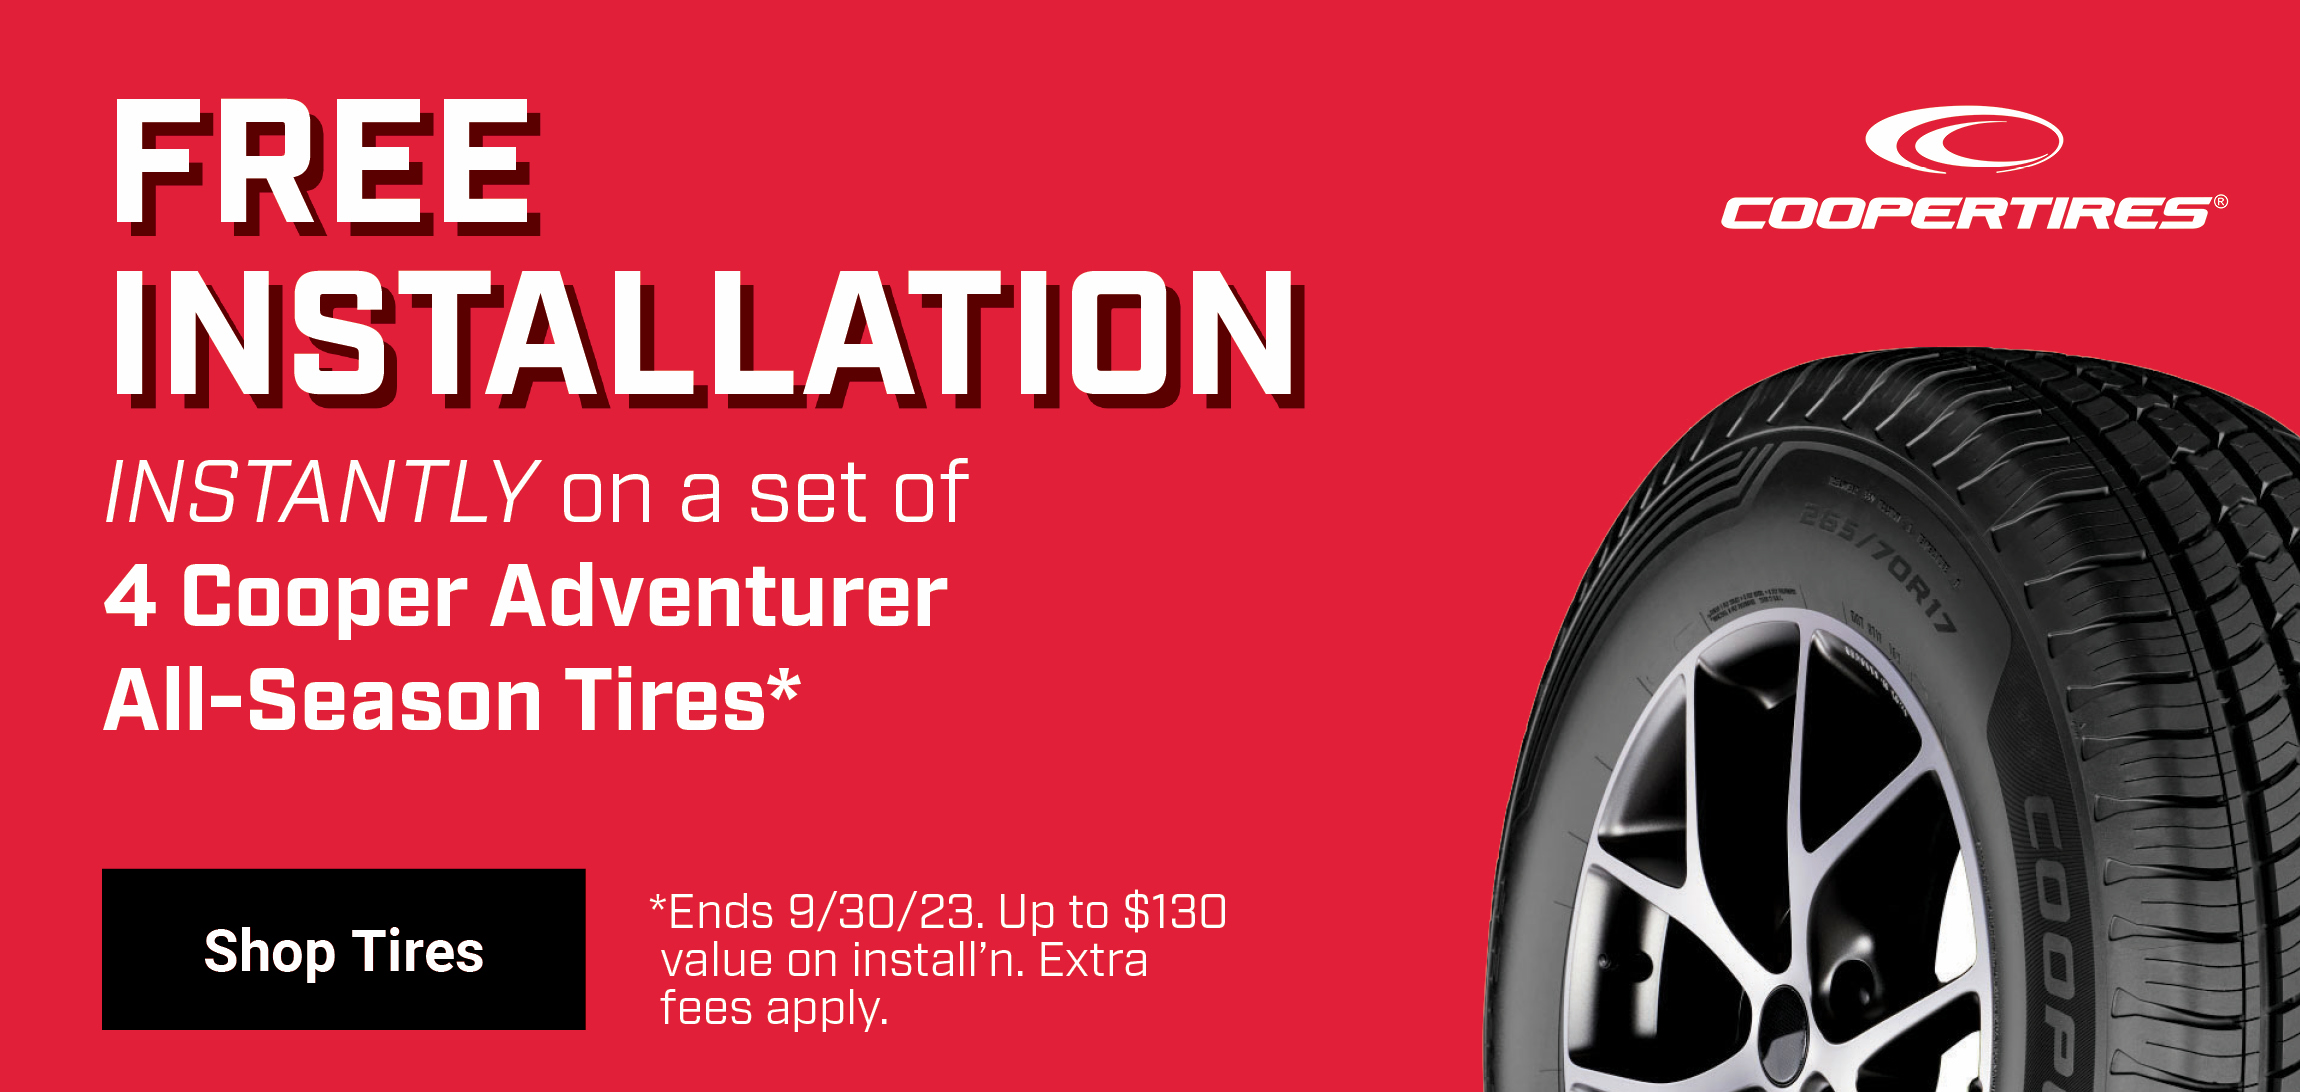 Save on Cooper Tires